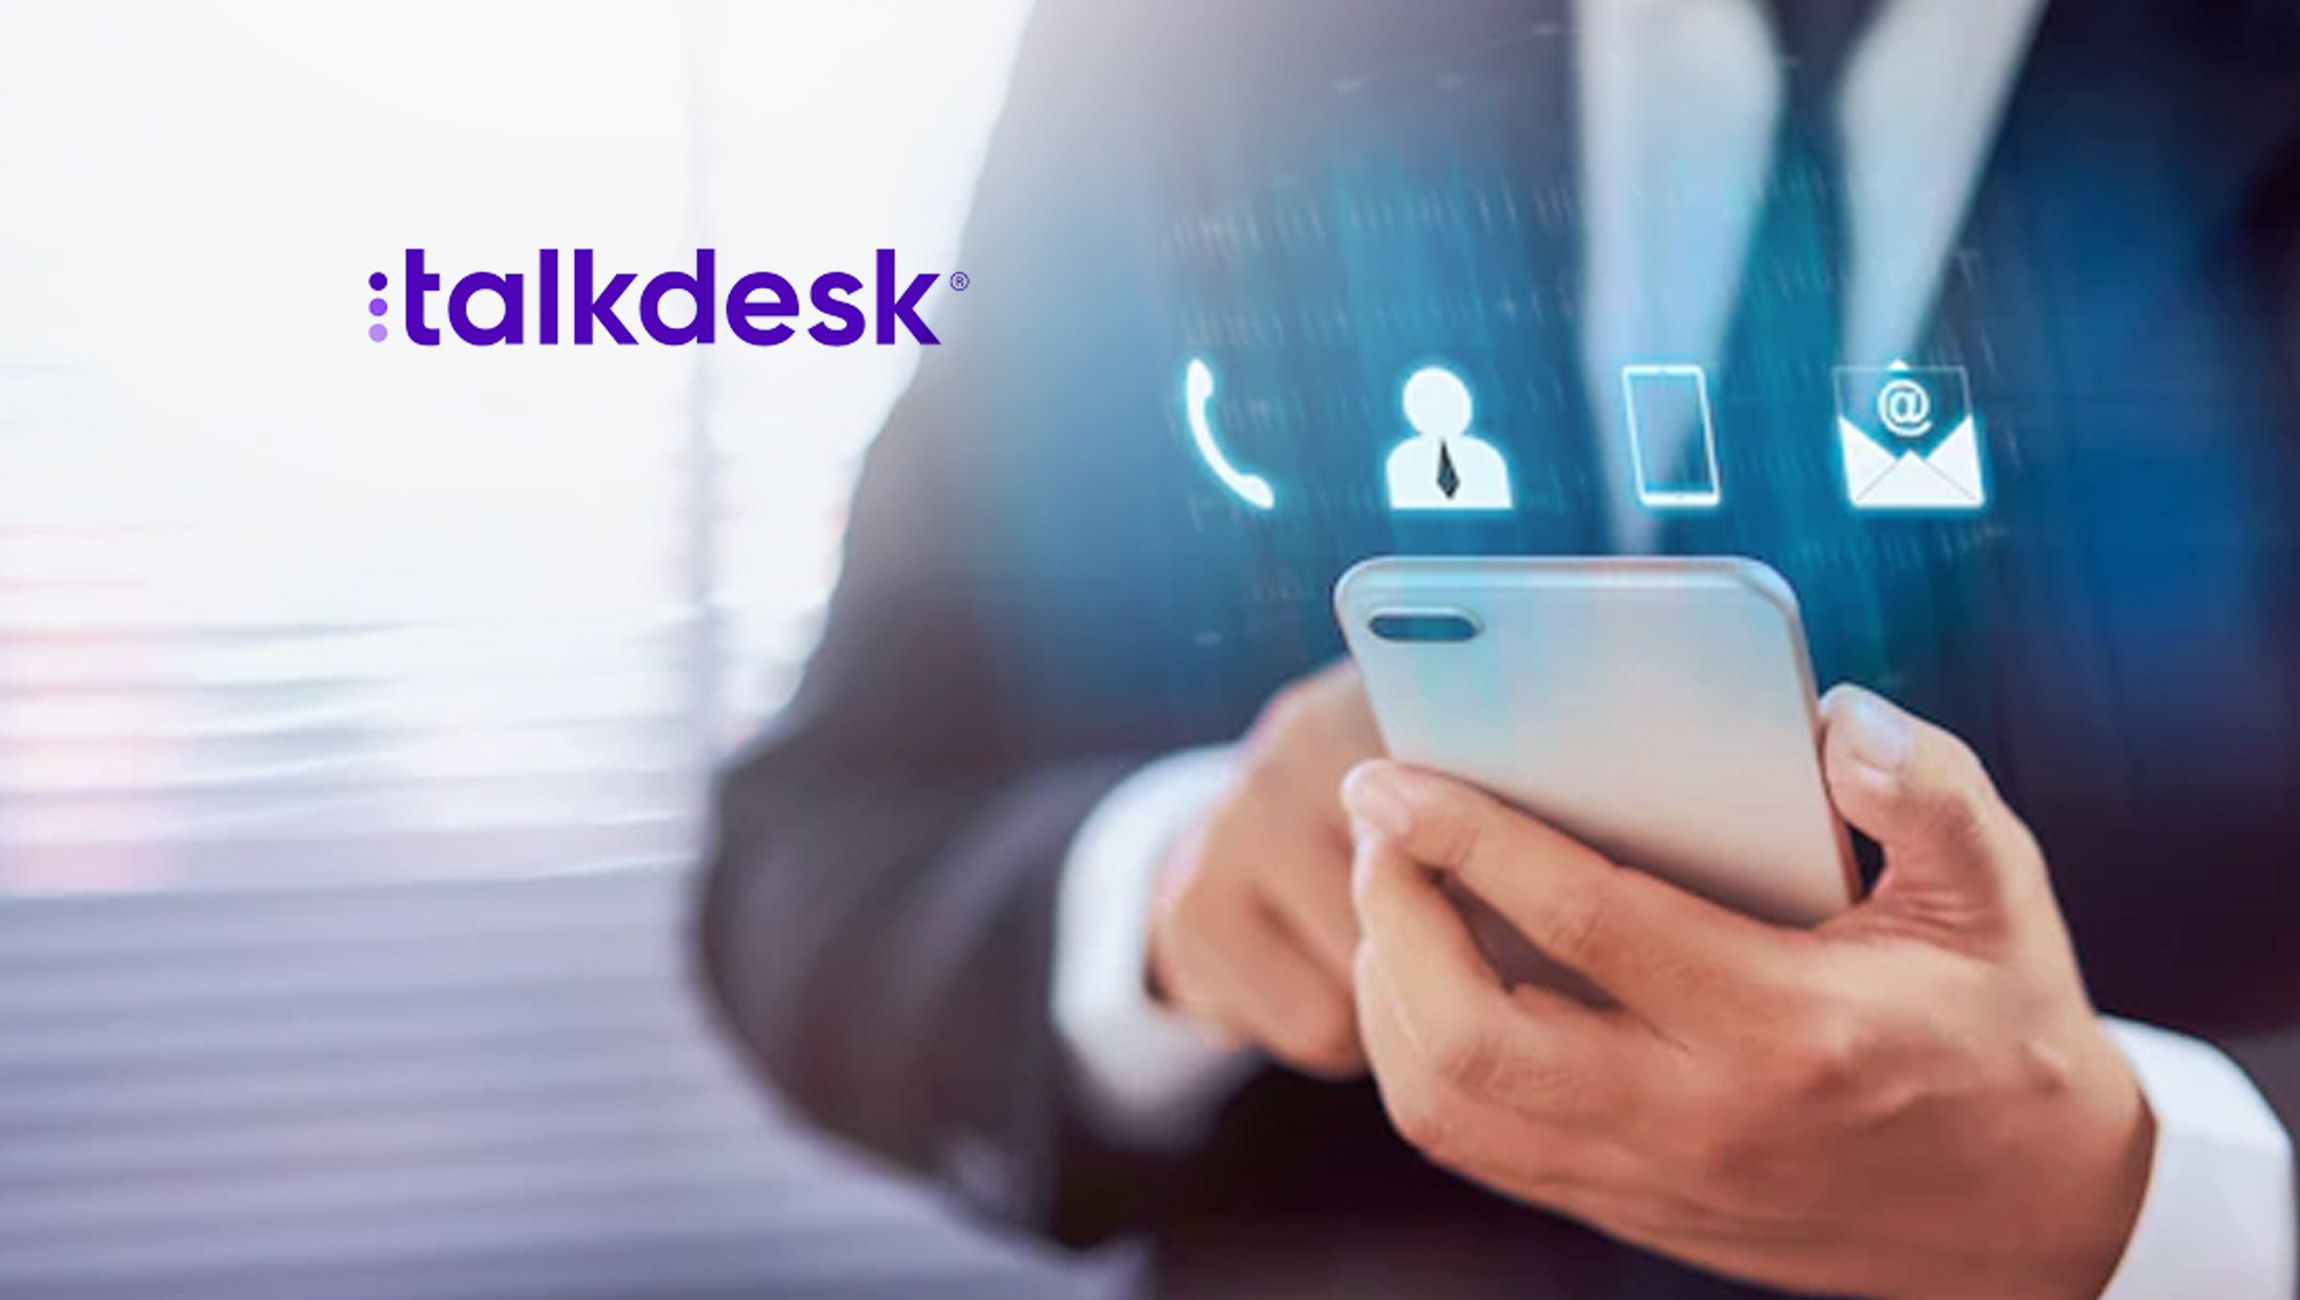 WaFd Banks on Talkdesk to Transform Customer Experiences